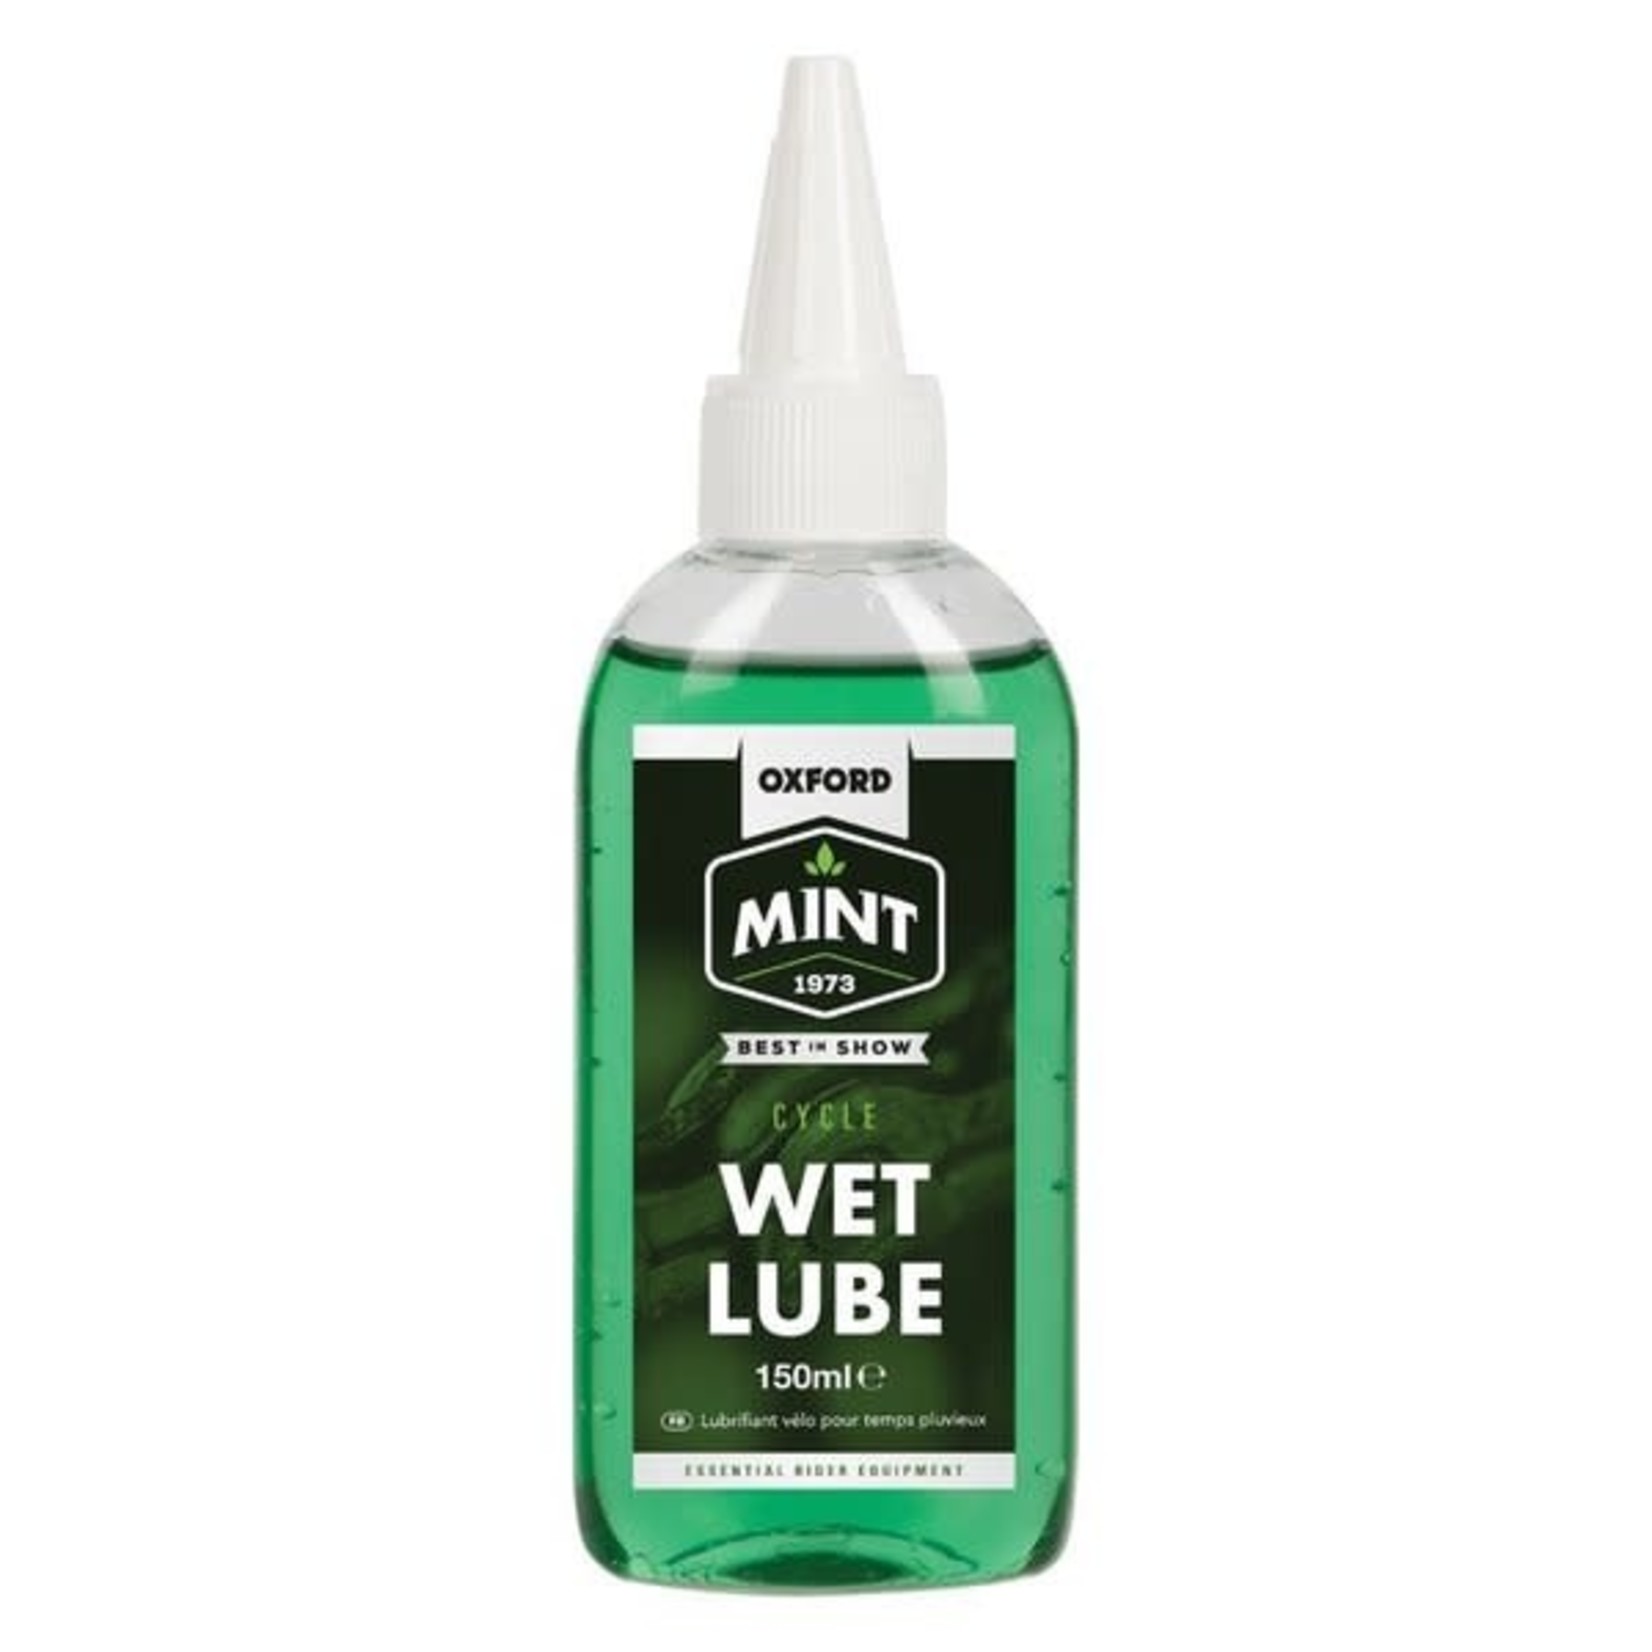 OXFORD MINT Cycle Wet Lube 150ml